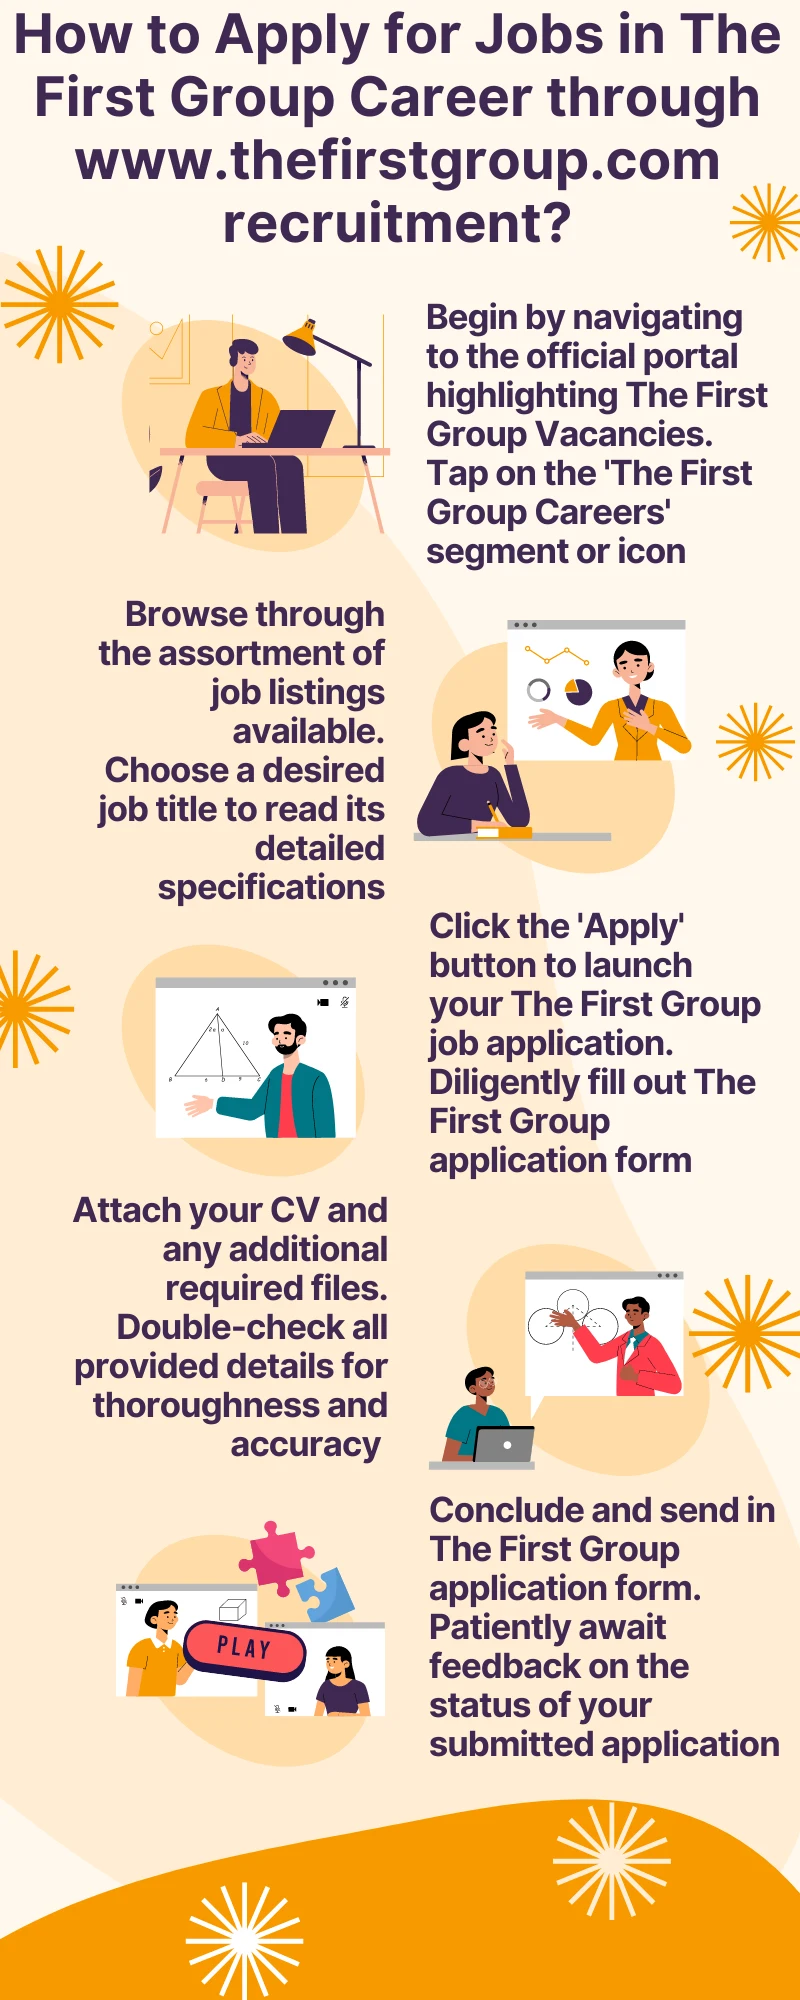 How to Apply for Jobs in The First Group Career through www.thefirstgroup.com recruitment?